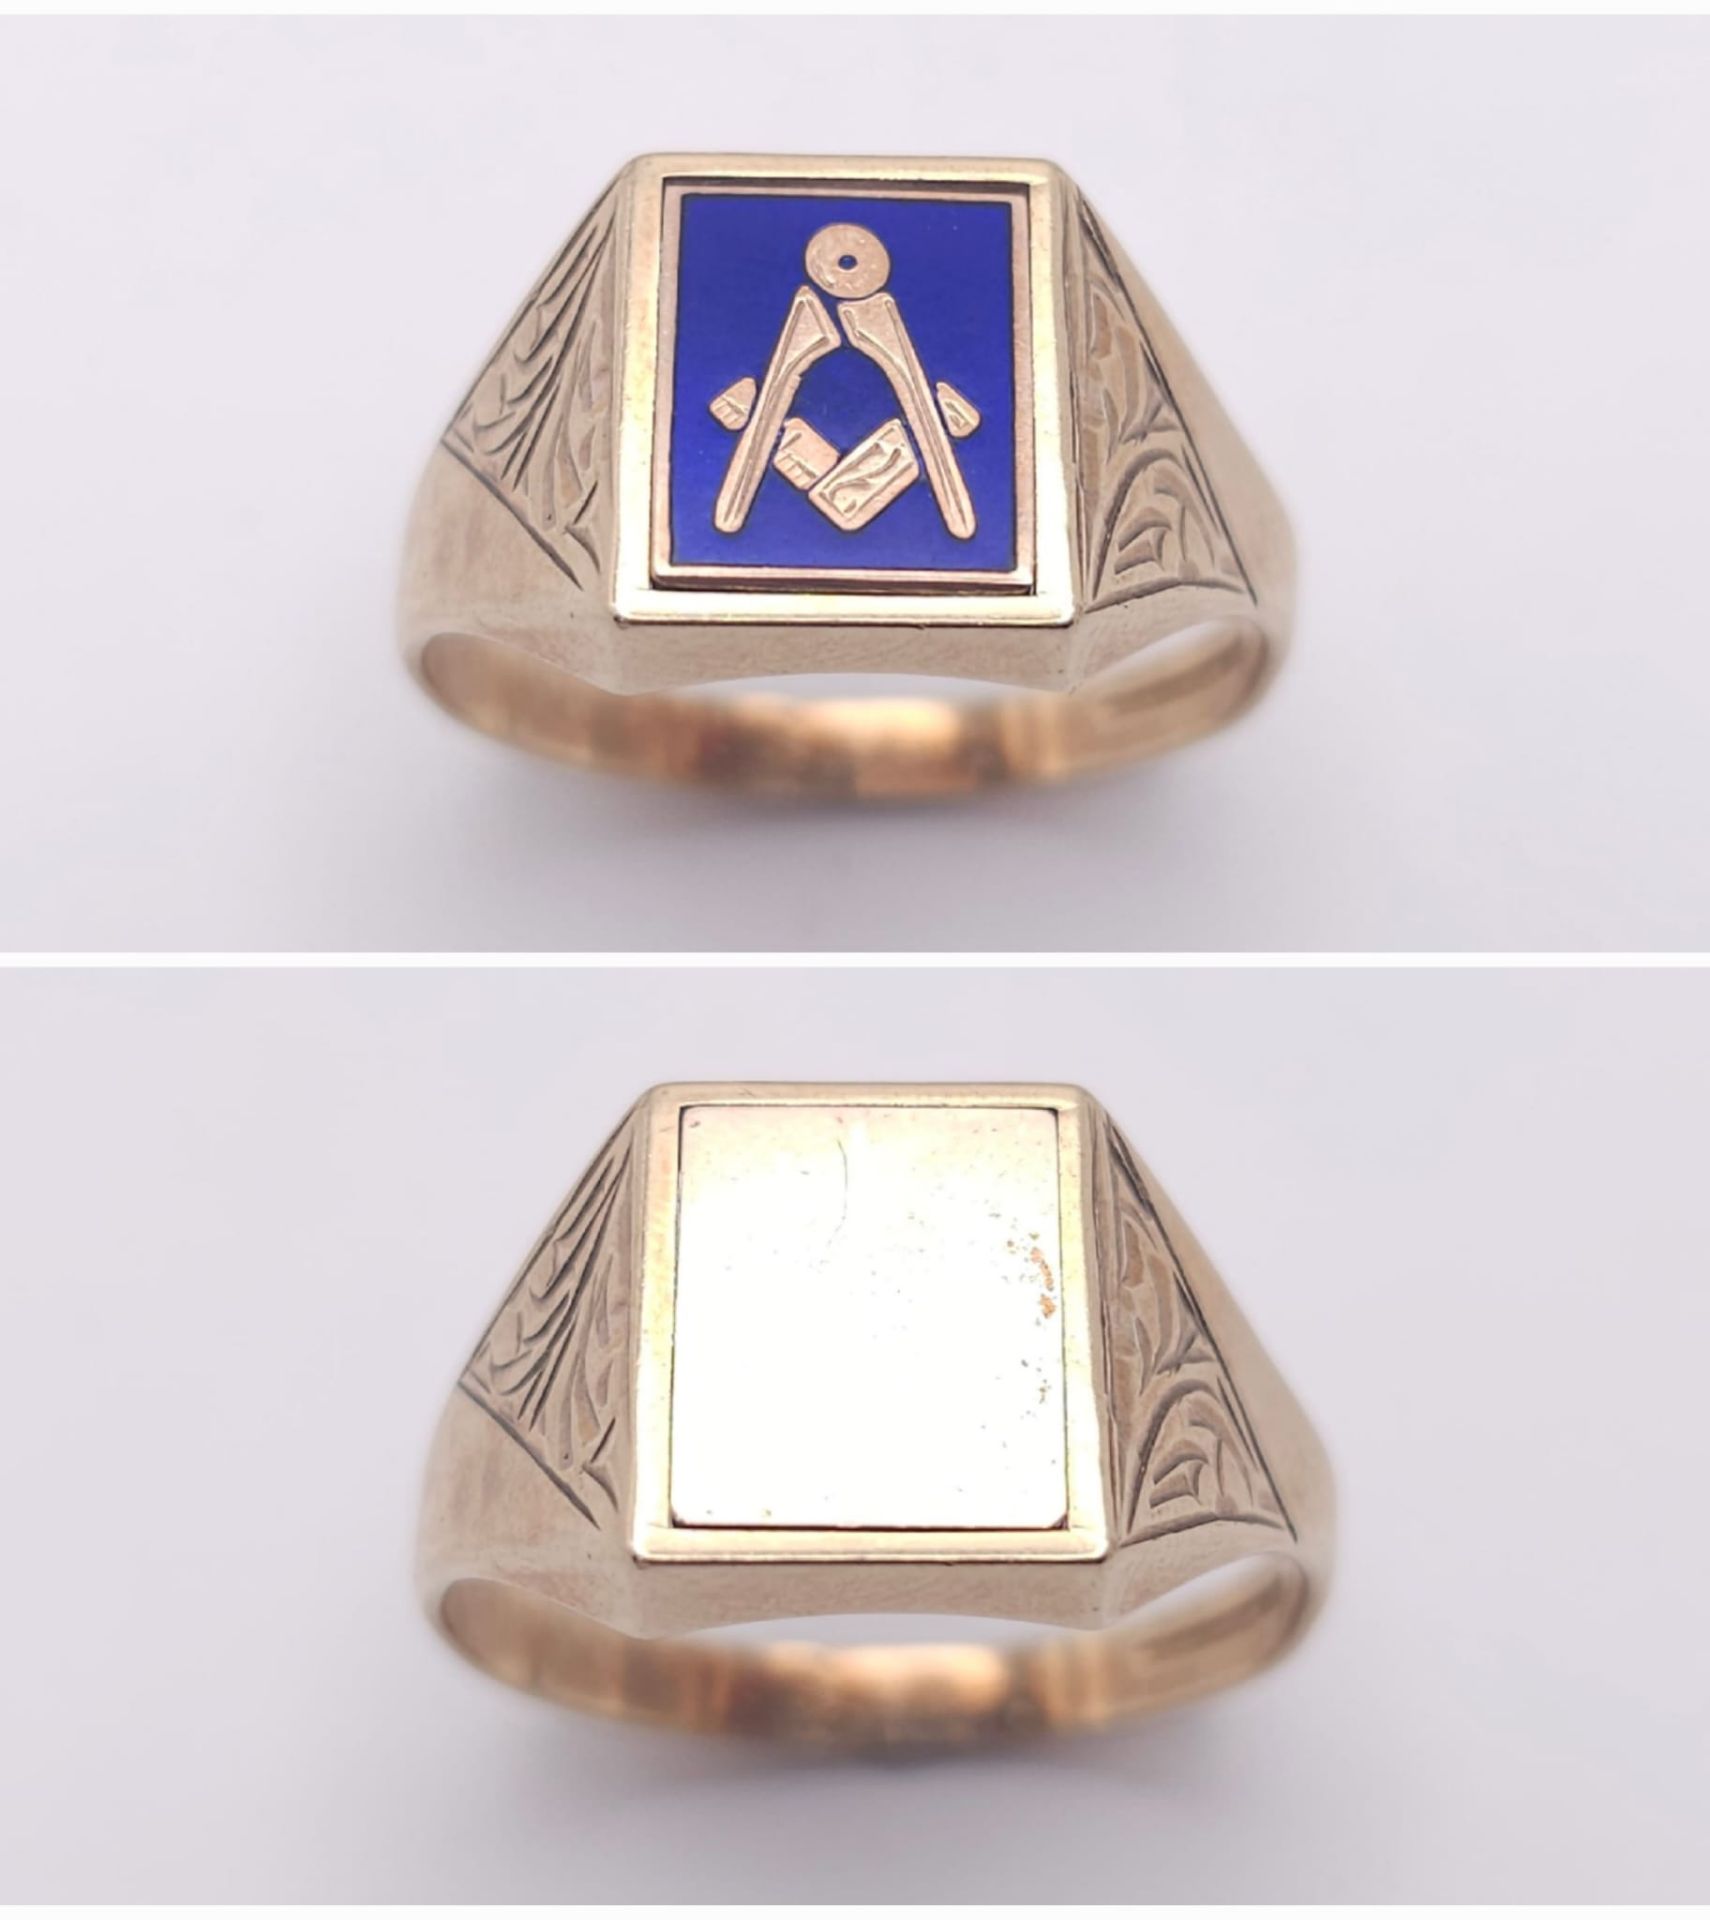 A GENTS 9K GOLD SIGNET RING WITH A HIDDEN MASONIC SYMBOL ON THE REVERSE, ENGRAVED PATTERN - Image 6 of 6